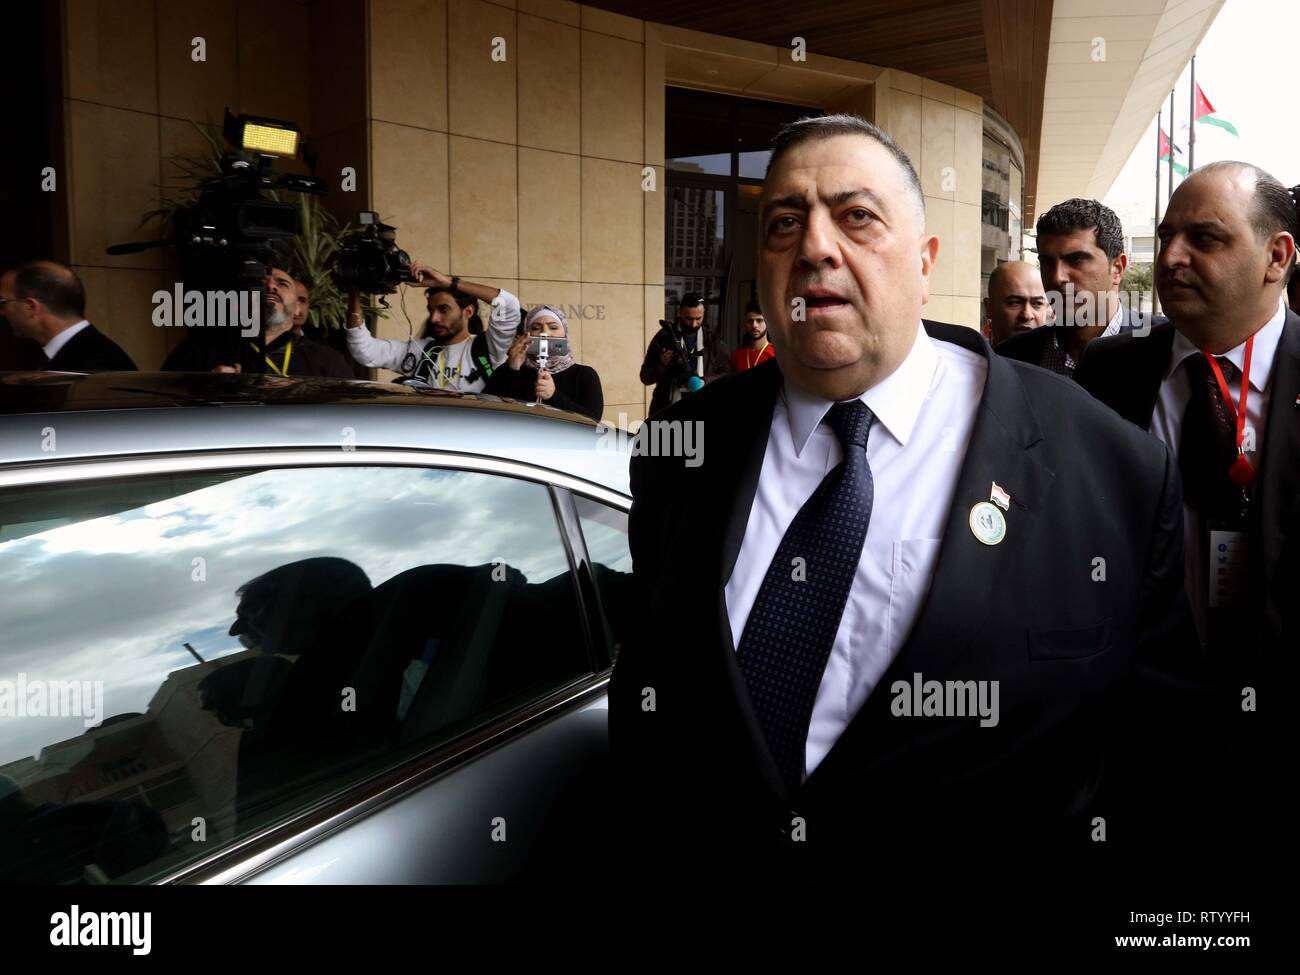 Amman, Jordan. 3rd Mar, 2019. Speaker of Syrian People's Assembly Hammoudeh Sabbagh (Front) arrives for the opening of the 29th conference of the Arab Inter-Parliamentary Union (AIPU) in Amman, Jordan, on March 3, 2019. Hammoudeh Sabbagh representing Syria attended the meeting for the first time since the country's conflict broke out in 2011. Credit: Mohammad Abu Ghosh/Xinhua/Alamy Live News Stock Photo